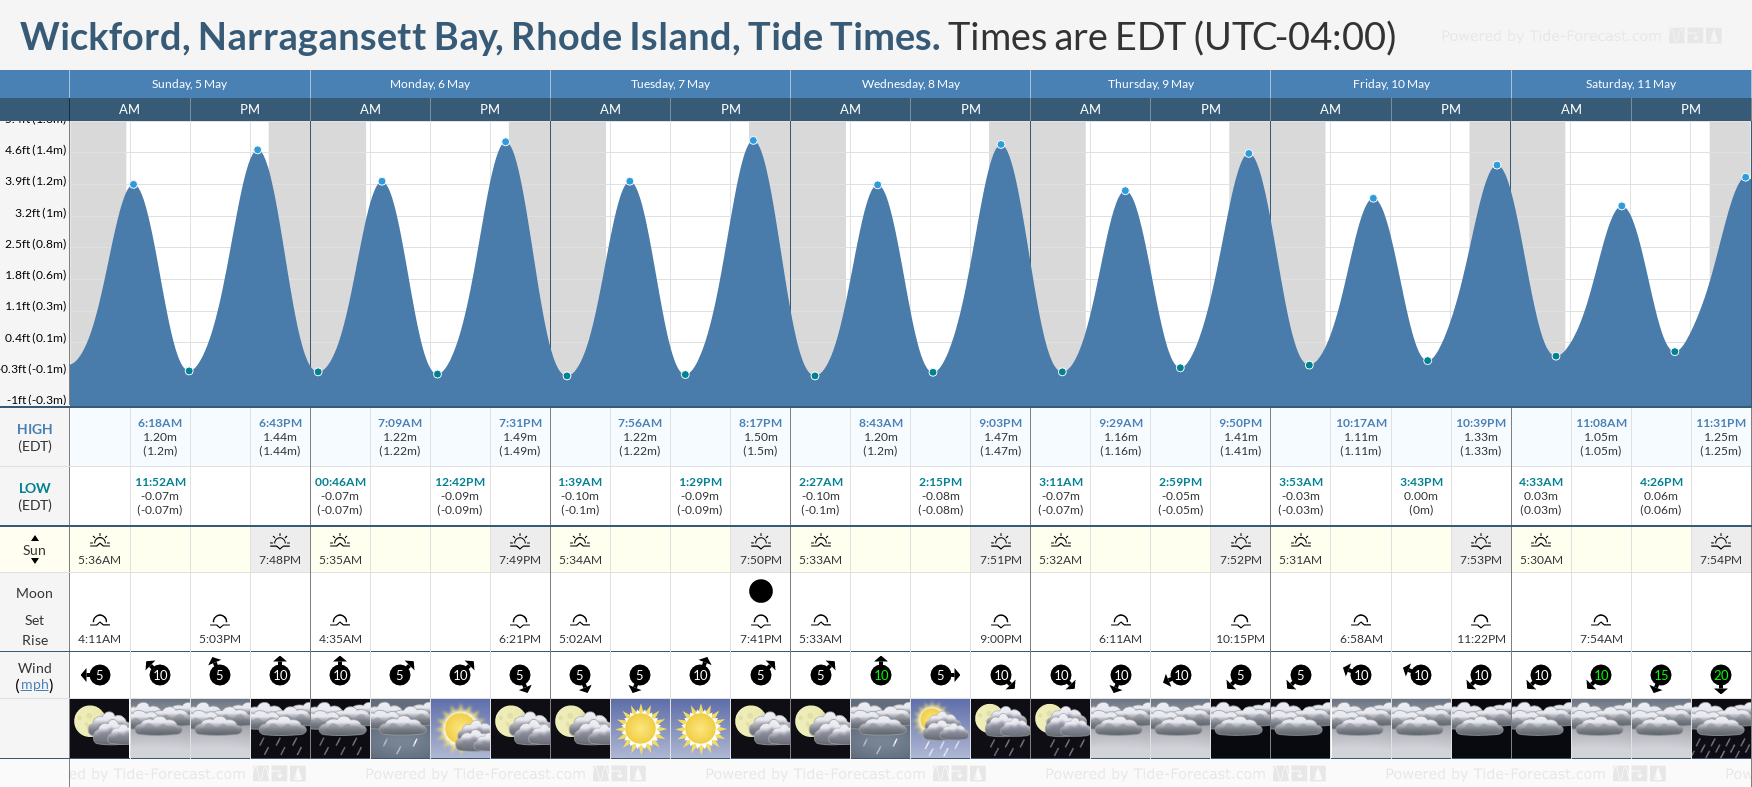 Wickford, Narragansett Bay, Rhode Island Tide Chart including high and low tide tide times for the next 7 days